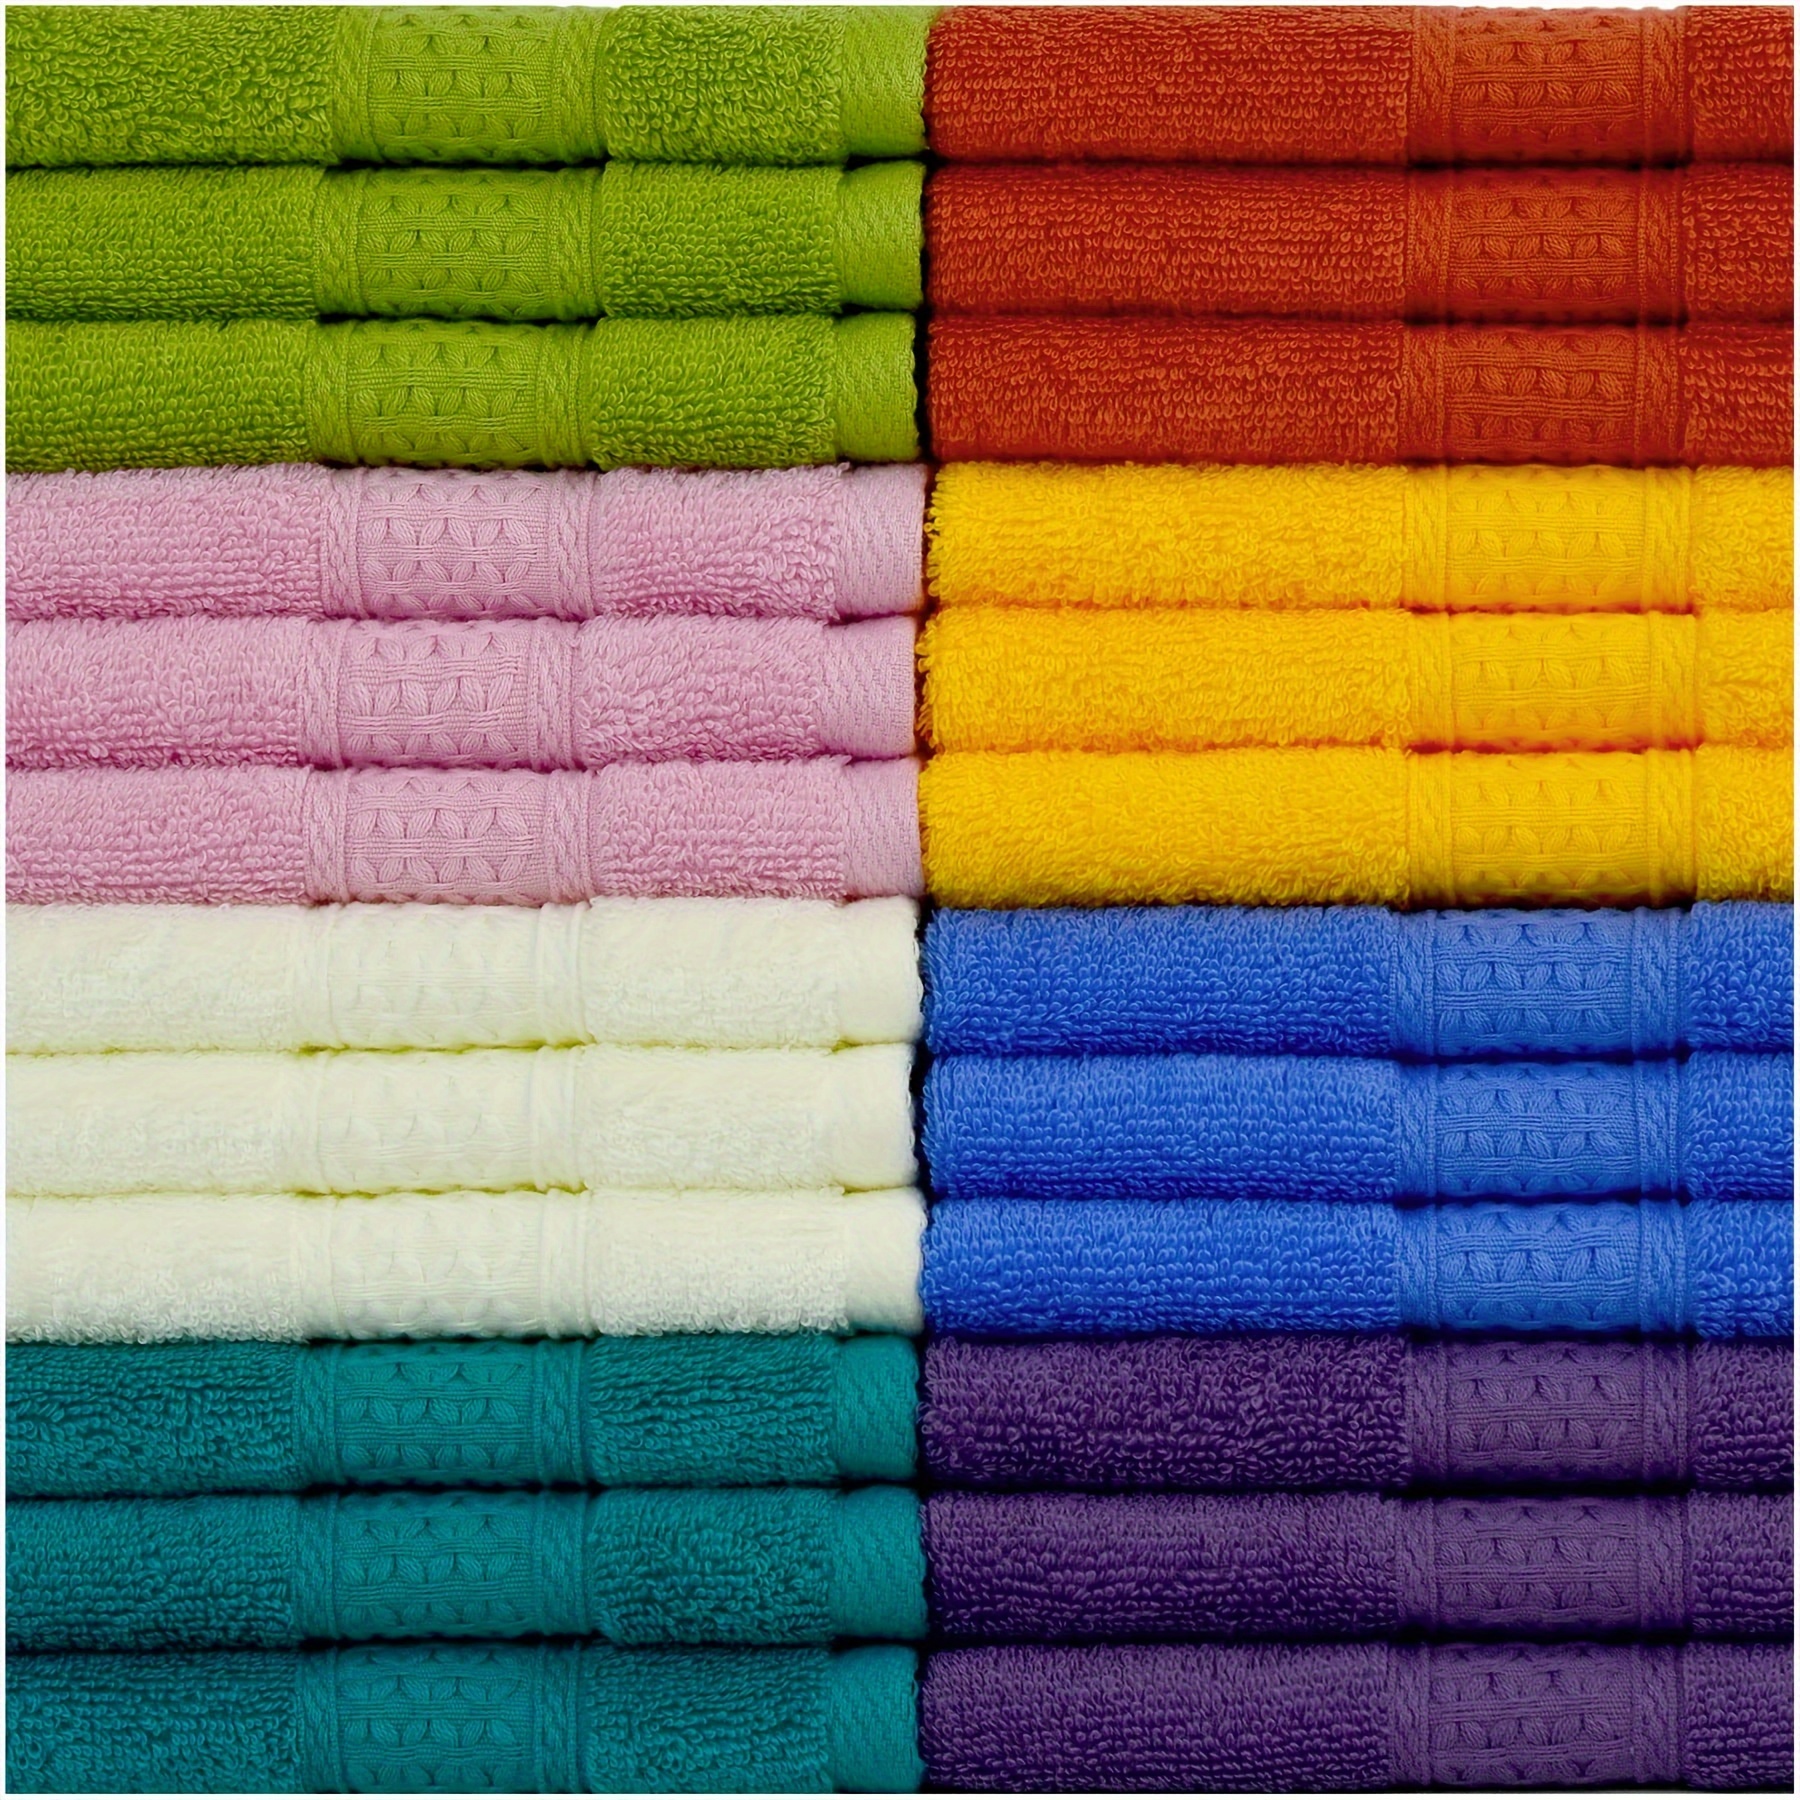 

12-pack Soft Bathroom Face Towels, 100% Cotton Woven Washcloths For Body And Face, Hotel & Travel Hand Towels, Assorted Colors, 400g/㎡ Square Weight, 13 X 13 Inches